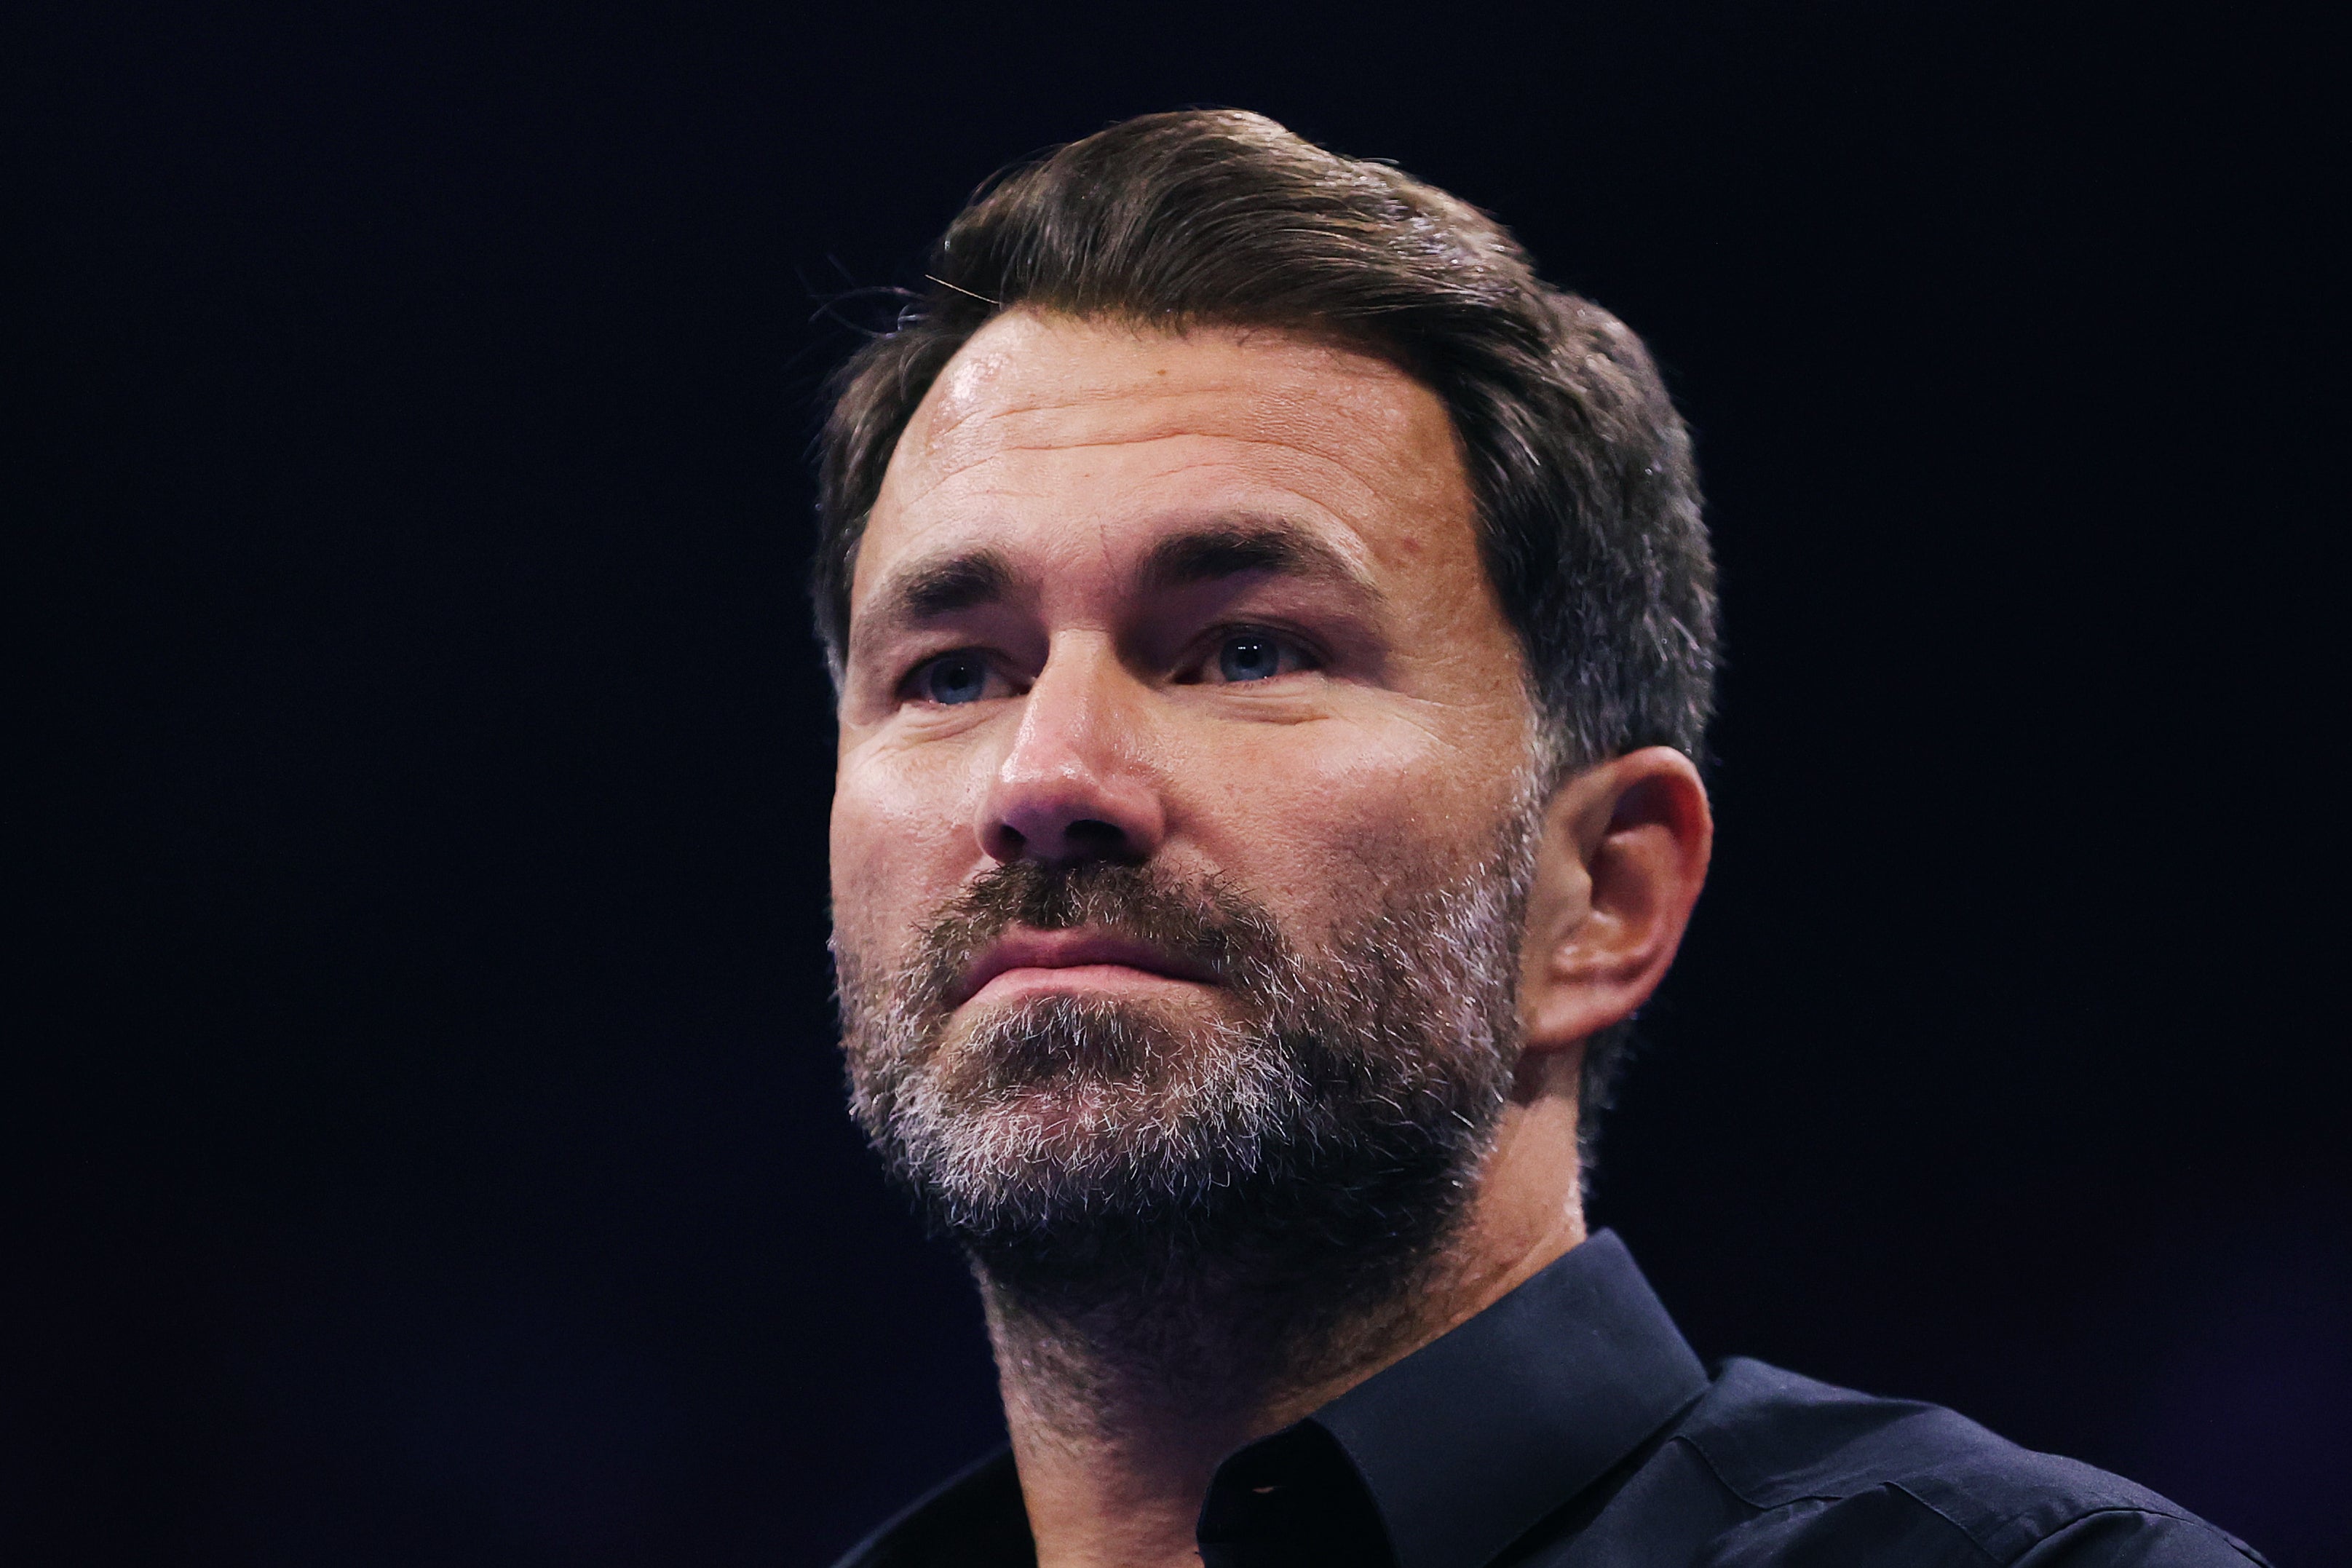 eddie hearn, katie taylor, conor mcgregor, eddie hearn hits out at reporter over conor mcgregor question after katie taylor fight